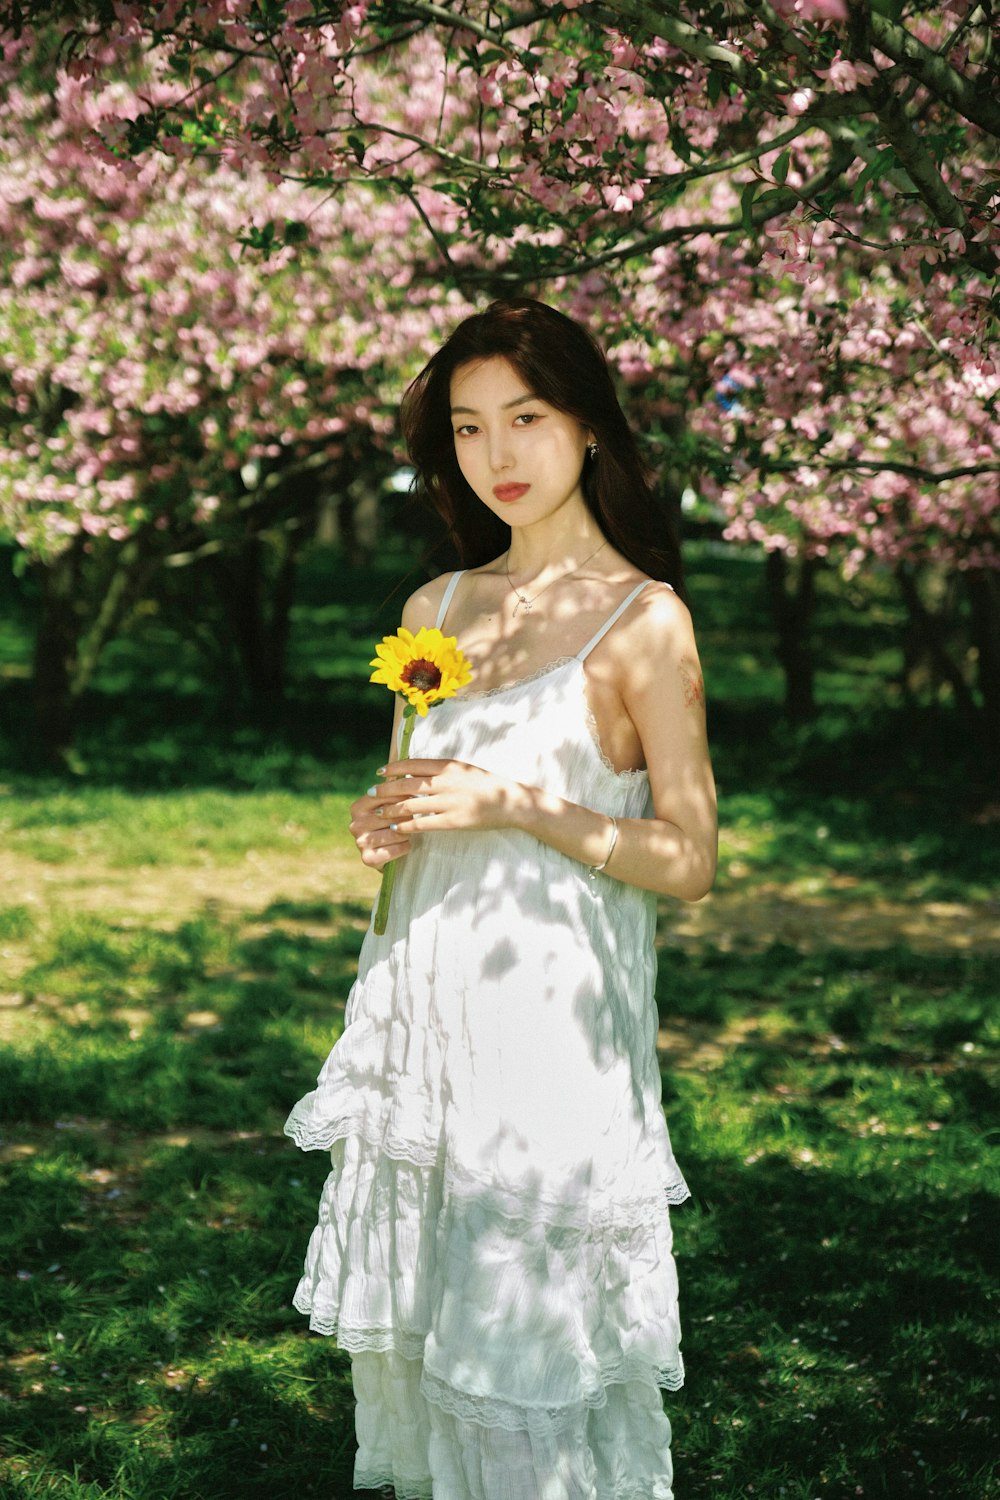 a woman in a white dress holding a sunflower